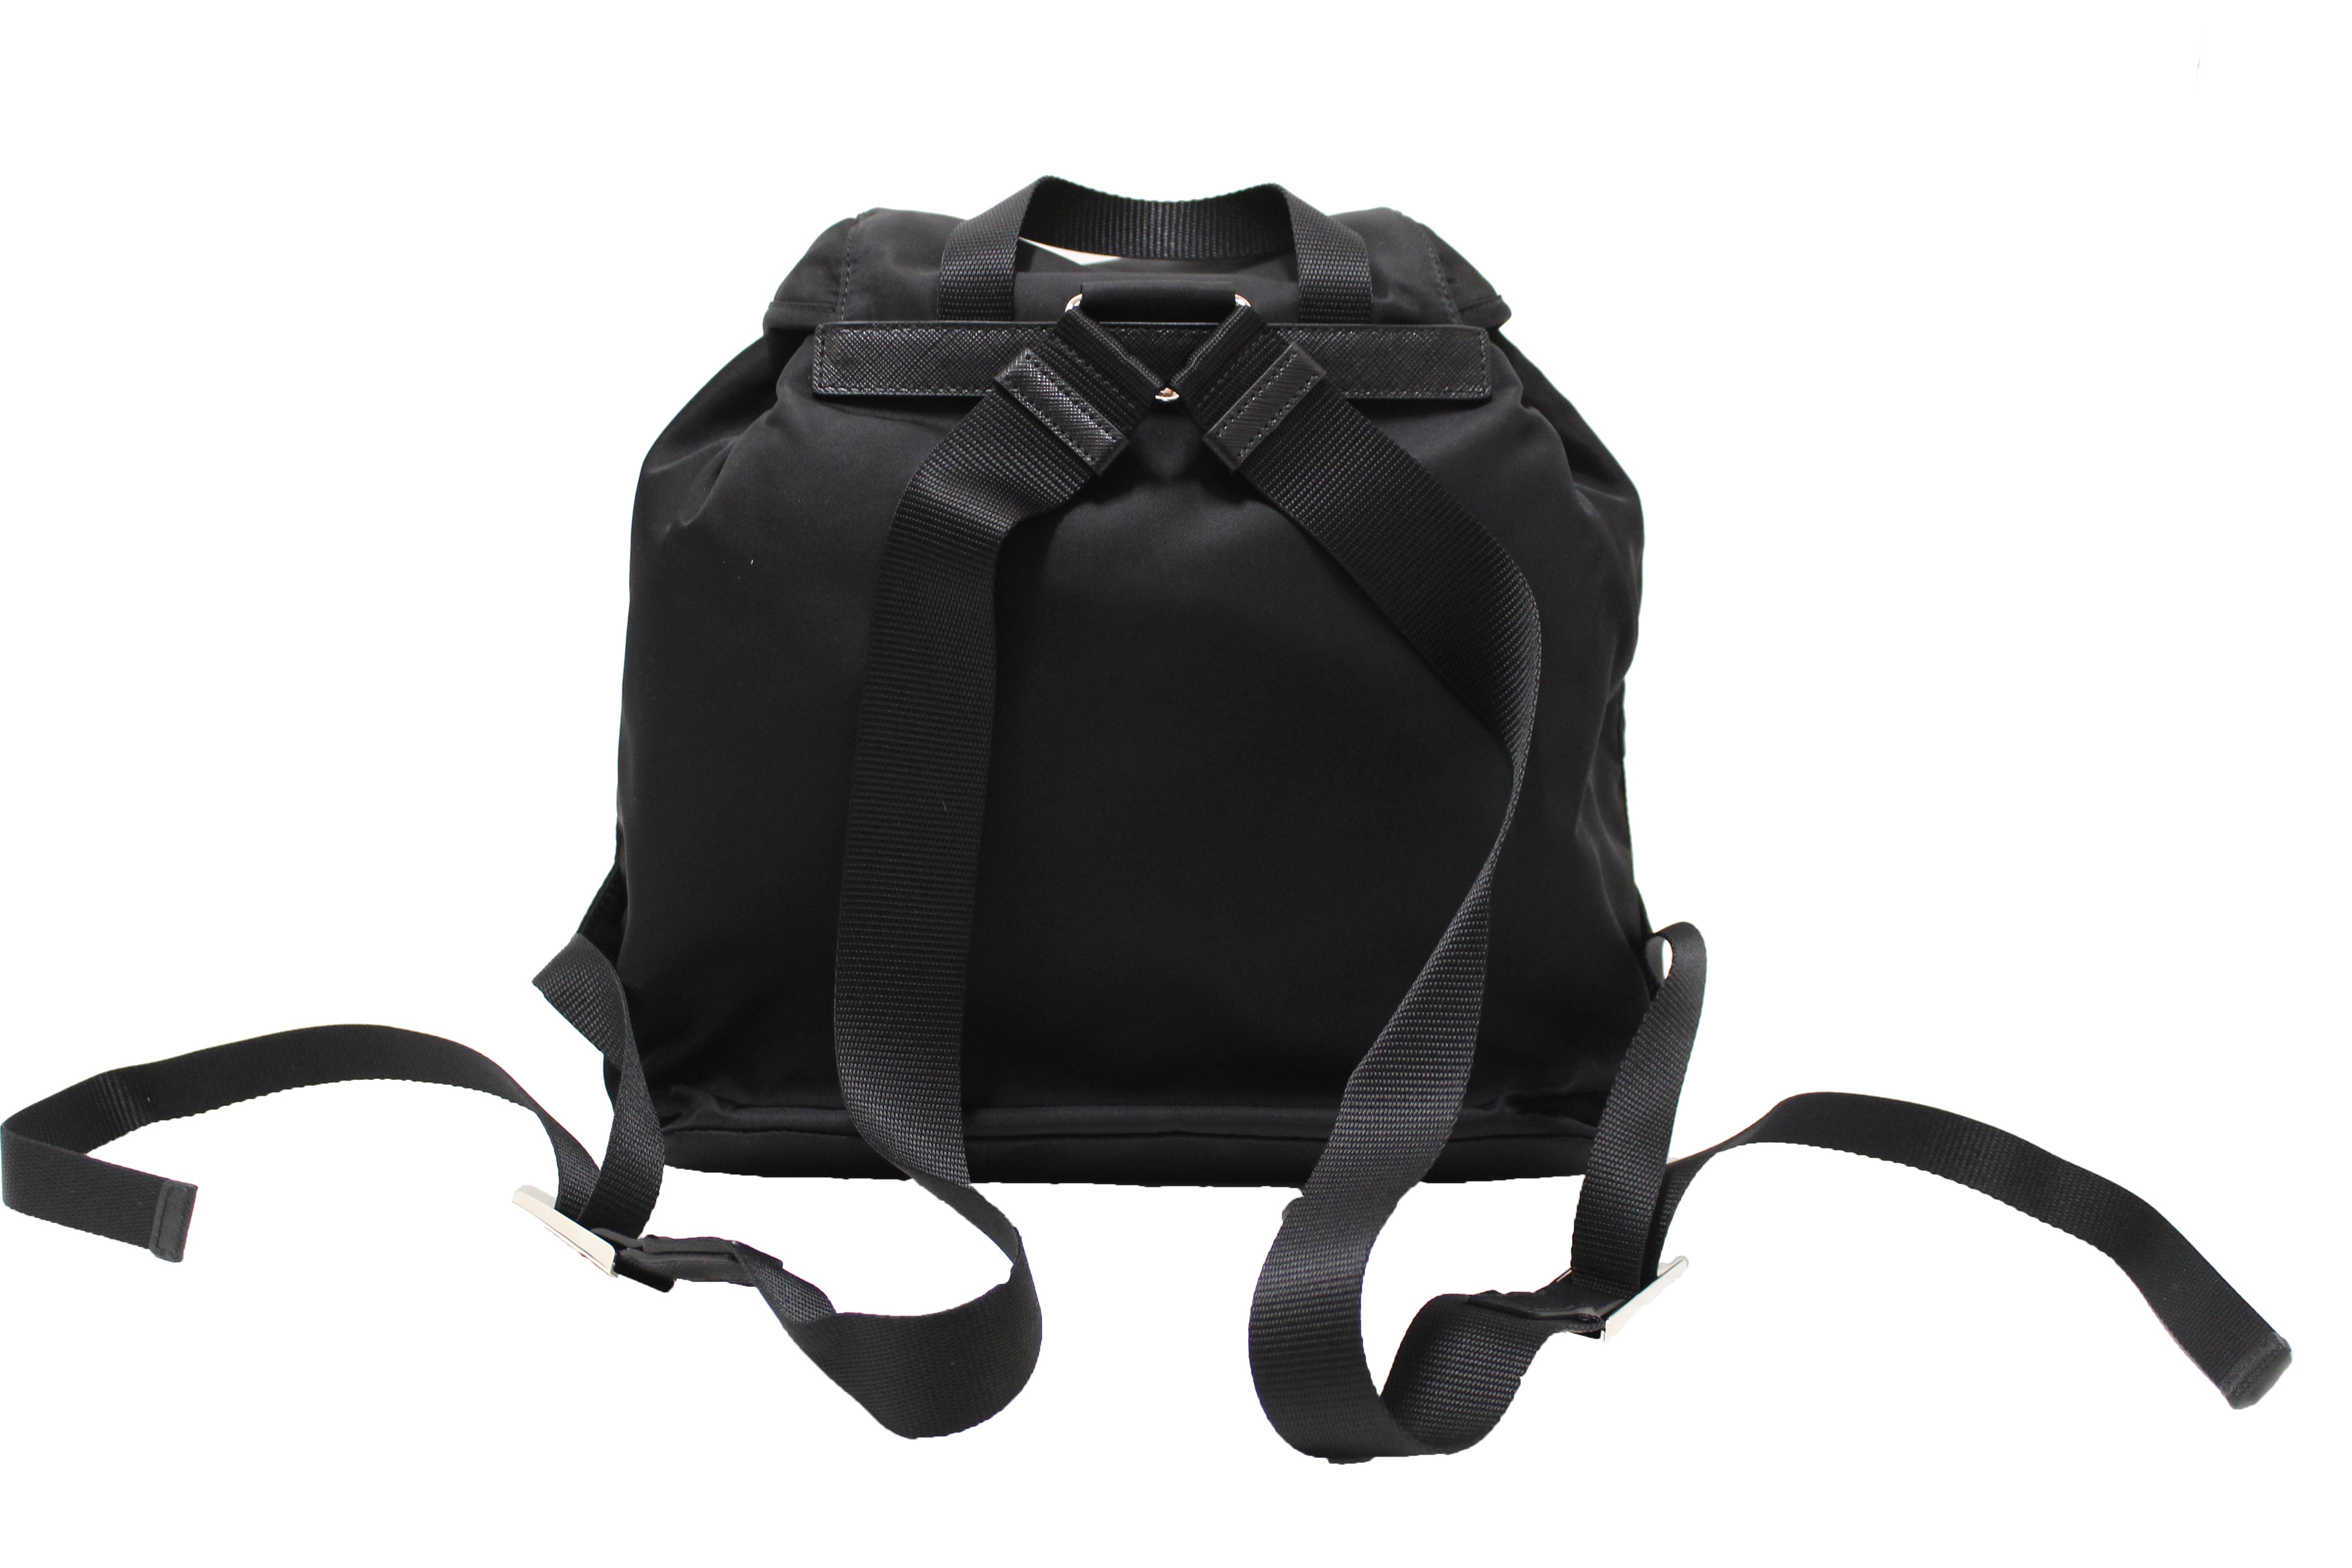 Authentic New Prada Black Nylon With Silver Hardware Backpack